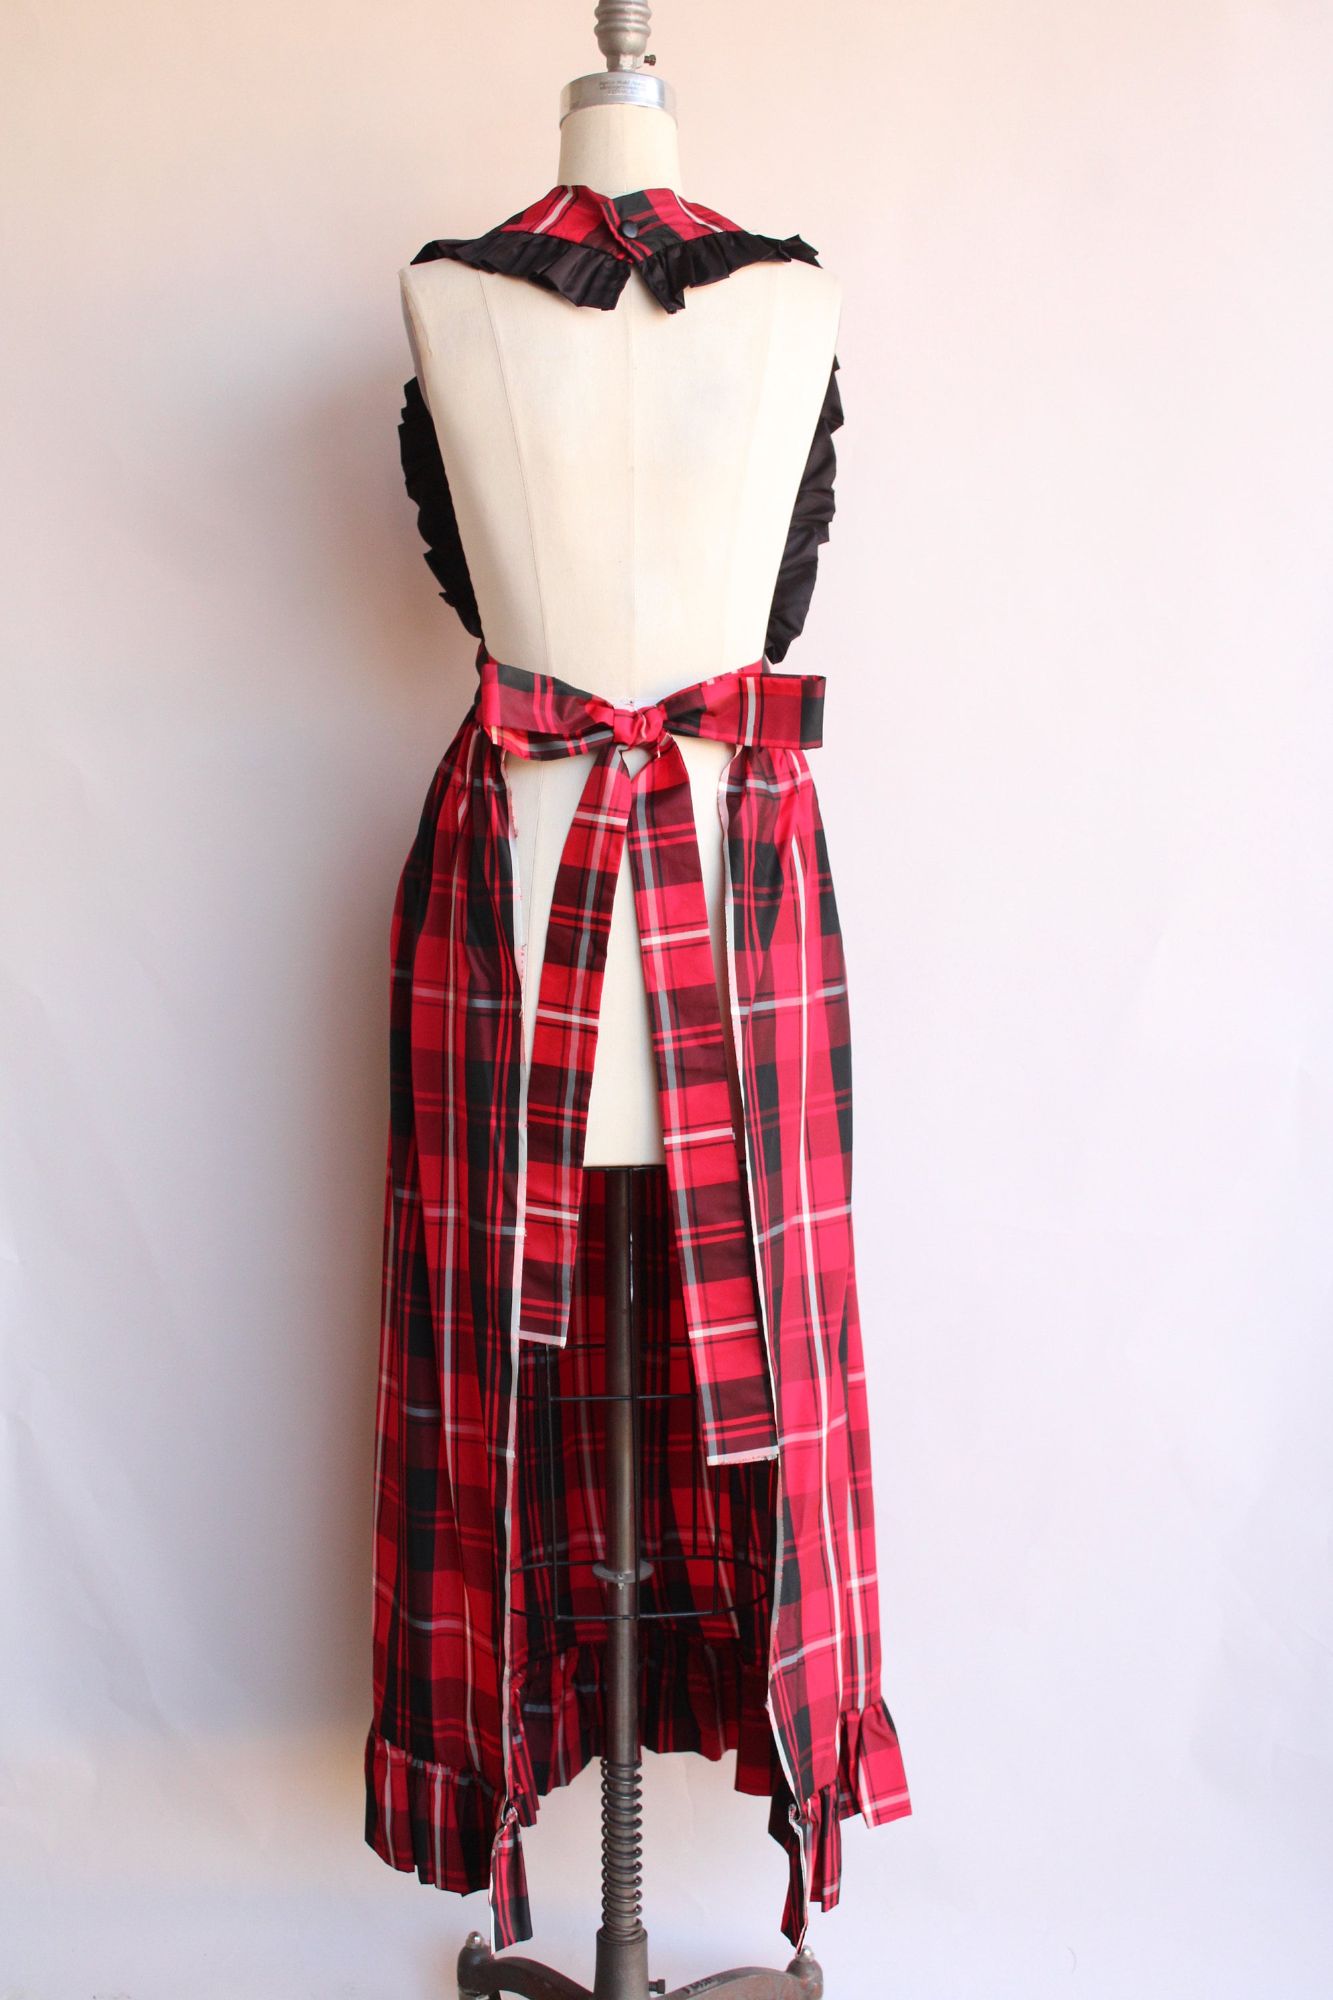 Vintage Full Apron, Red Tartan Plaid Pinafore With Pockets and Ruffles, Volup Size, Taffeta Christmas or Holiday